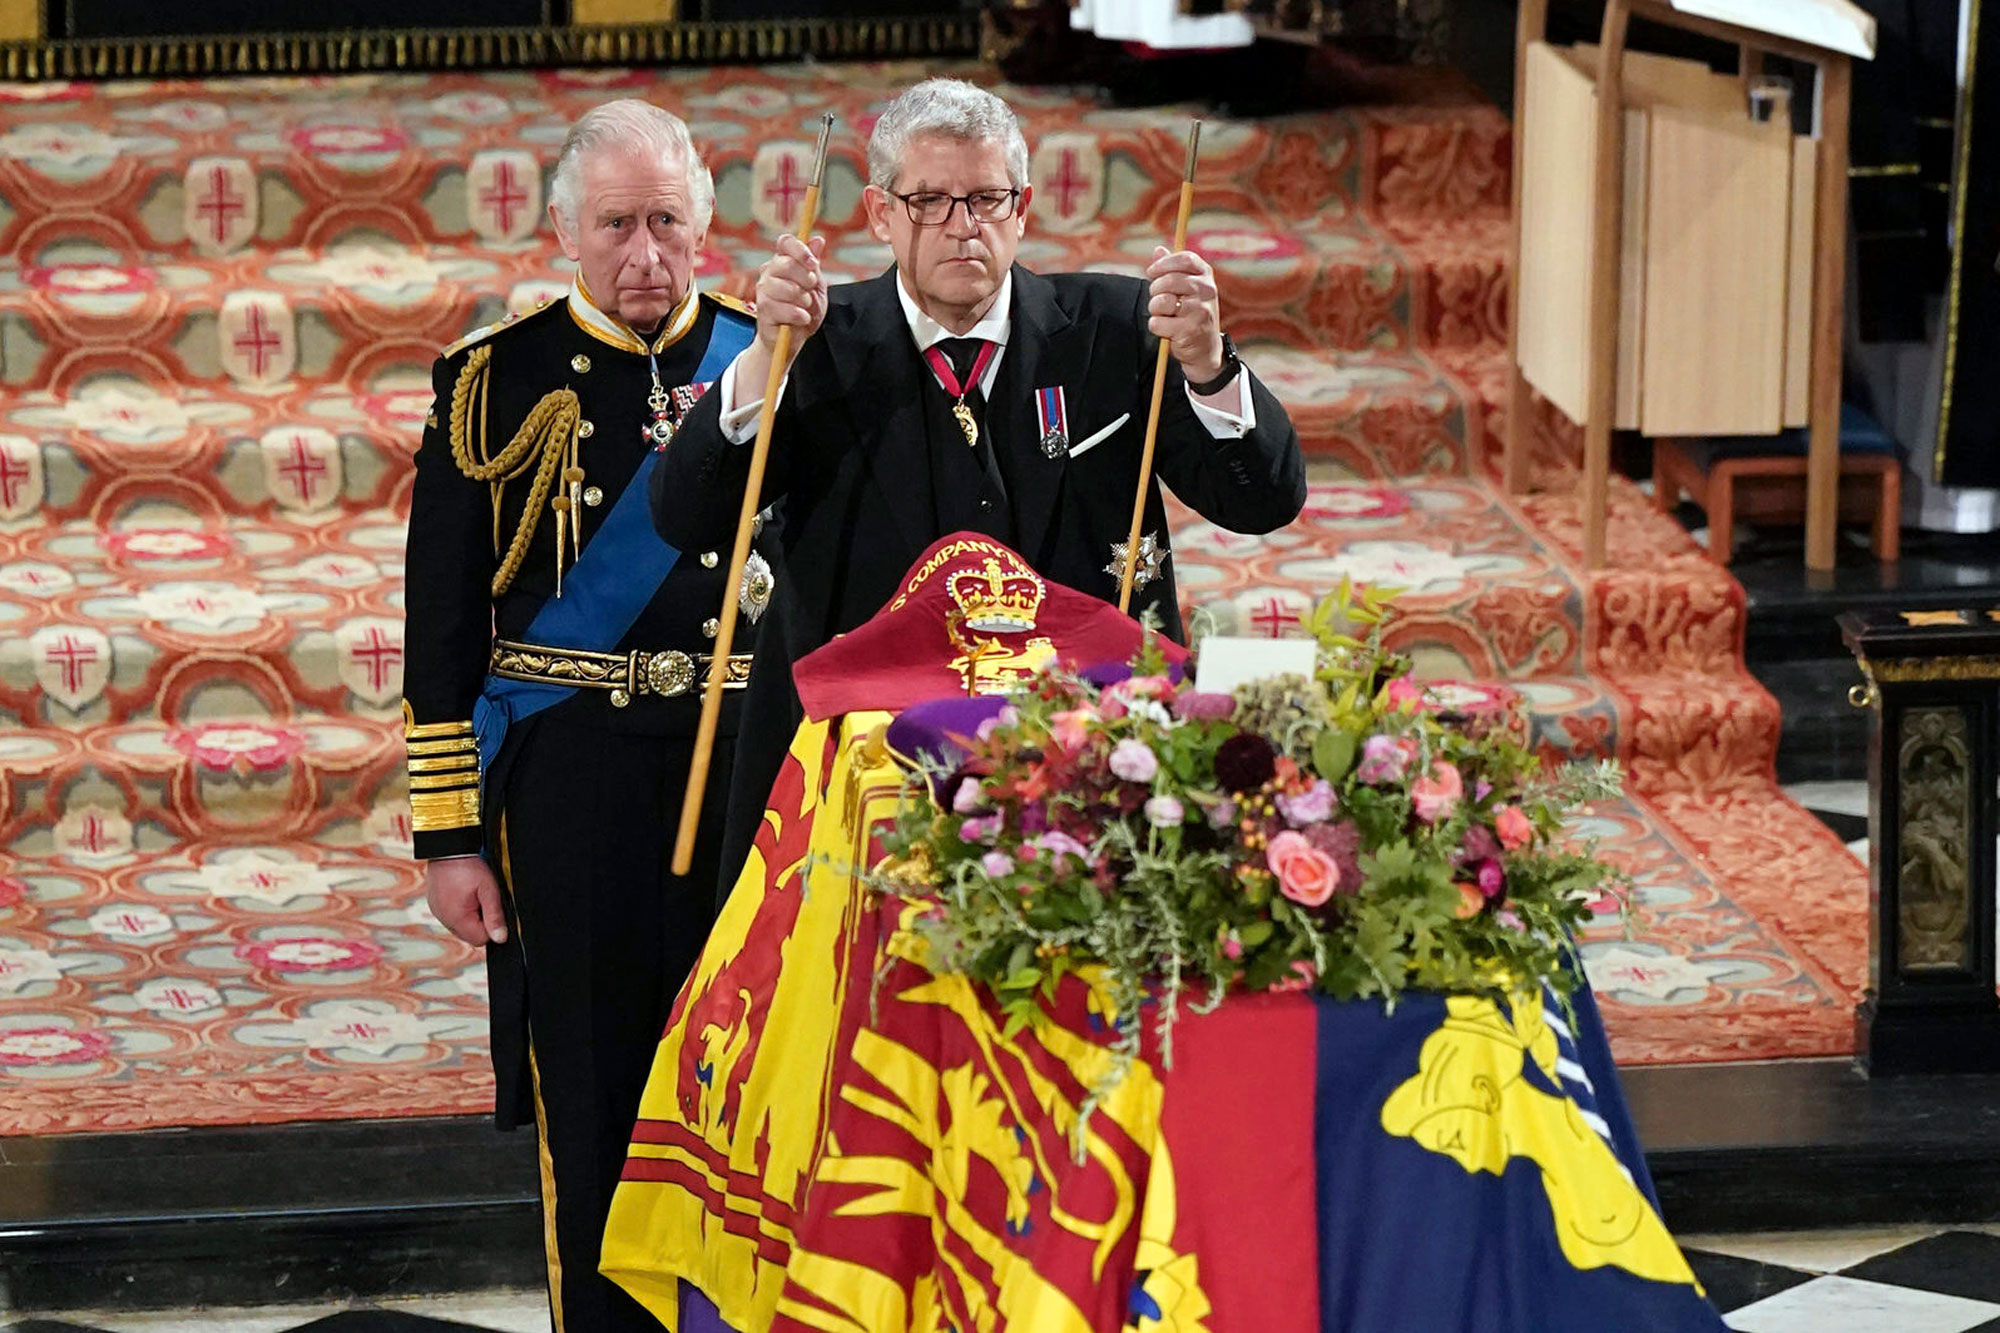 King Charles II, left, watches as The Lord Chamberlain Baron Parker breaks his Wand of Office, marking the end of his service to the sovereign, during a committal service for Britain's Queen Elizabeth II at St George's Chapel, Windsor Castle, in Windsor, England, Monday, Sept. 19, 2022.